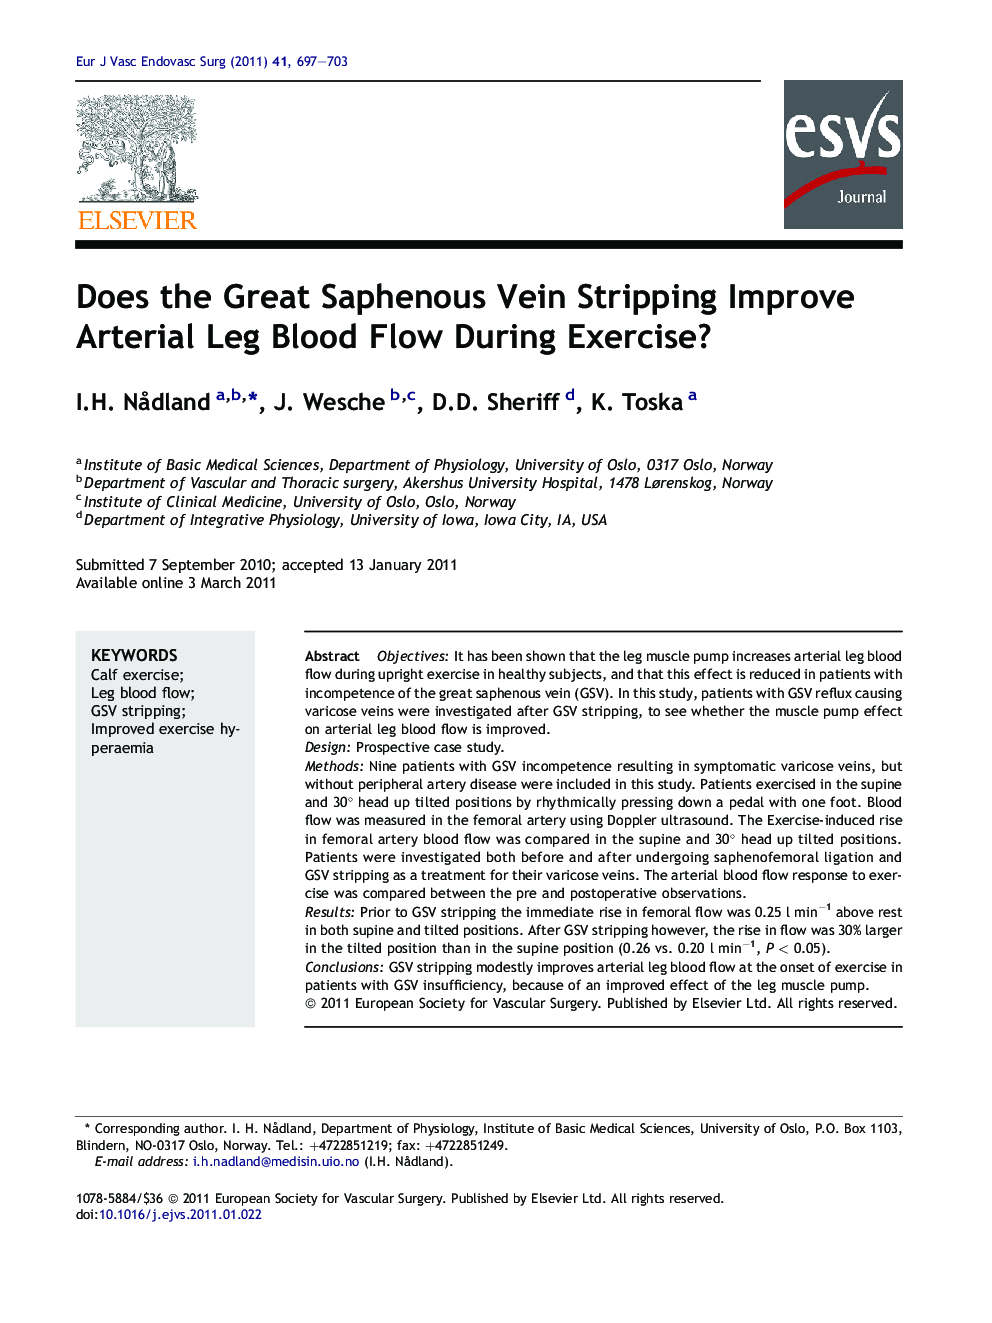 Does the Great Saphenous Vein Stripping Improve Arterial Leg Blood Flow During Exercise?